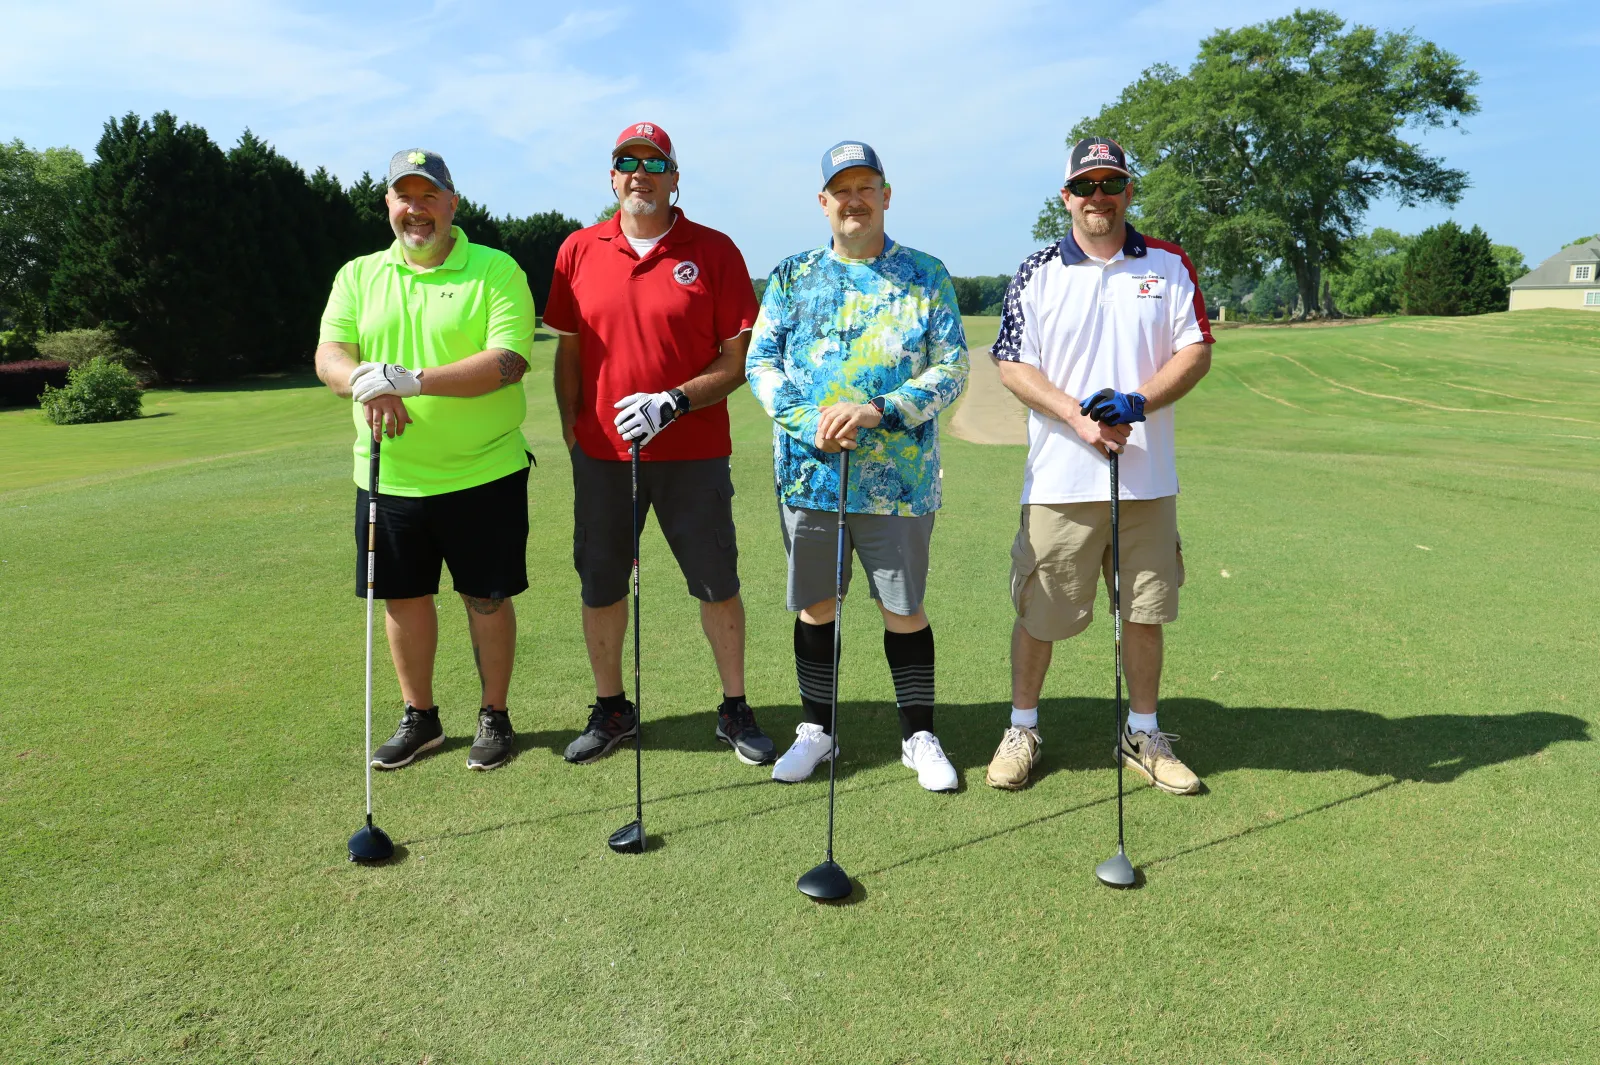 a group of people posing for a photo on a golf course